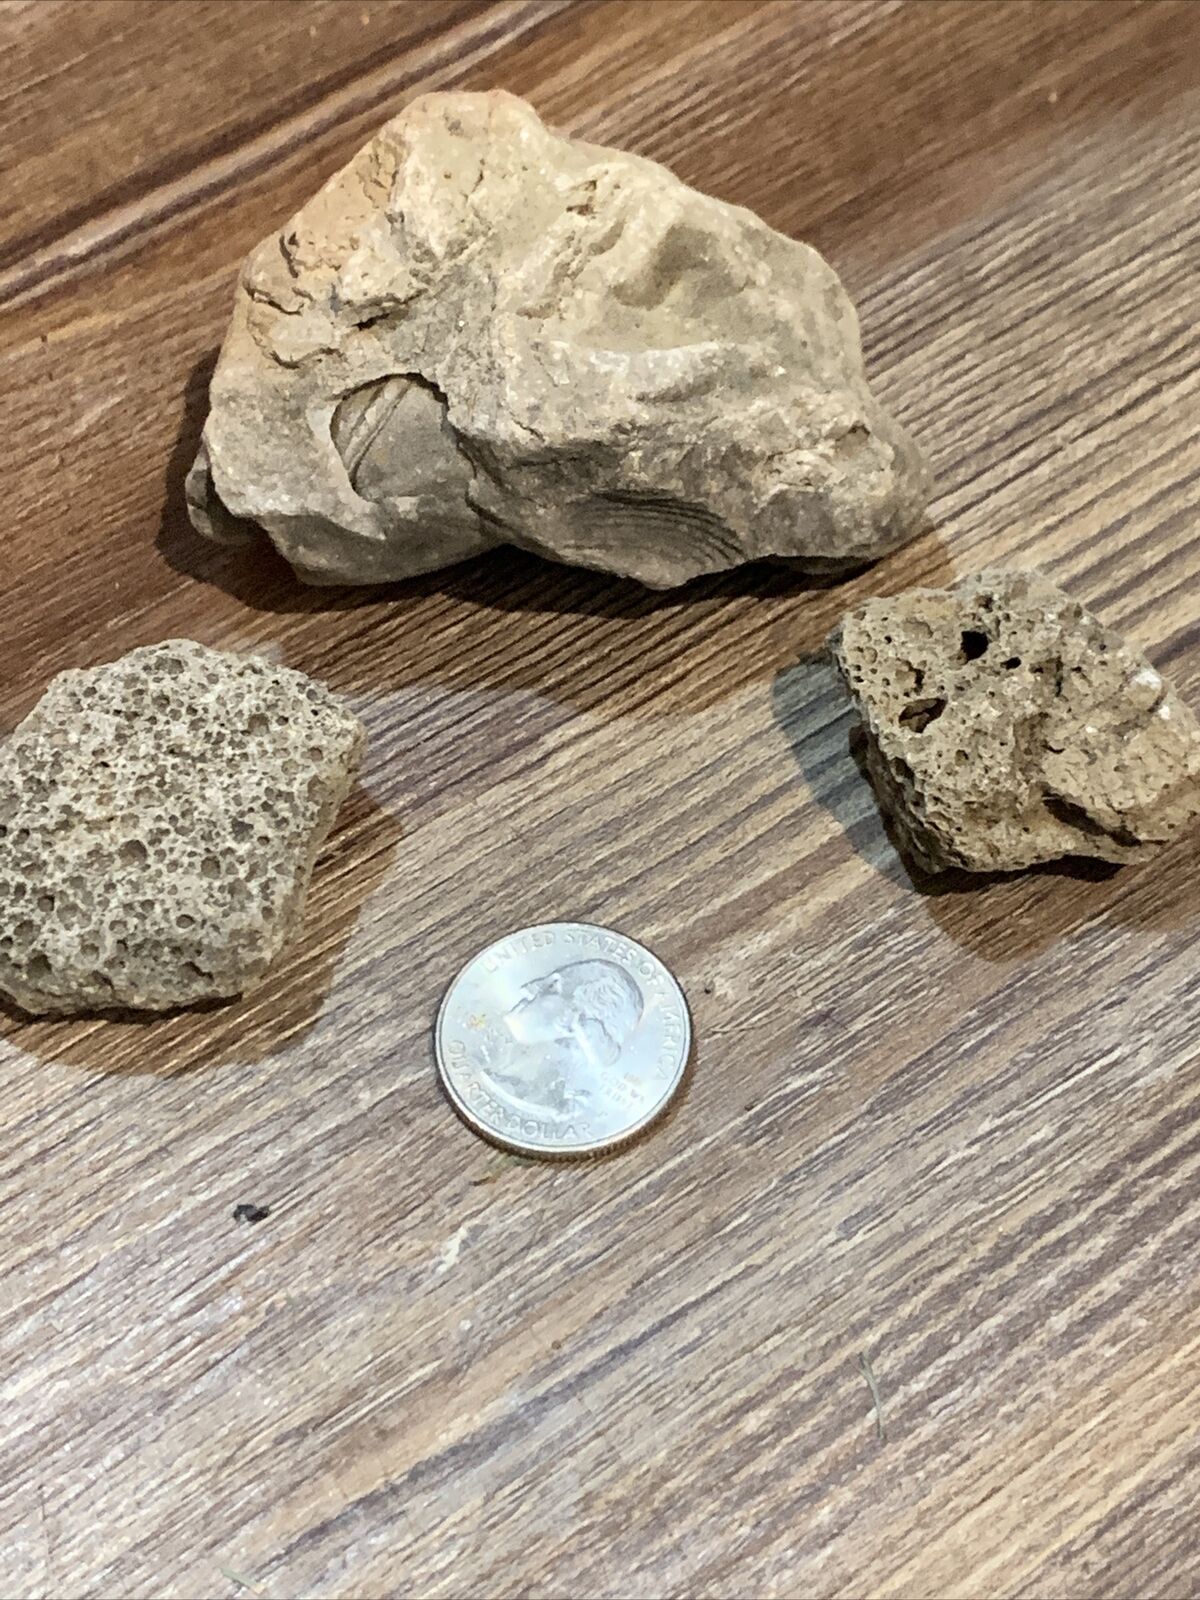 Fossils Total Of 3. Found On Indiana Farm - Spectacular Specimens!